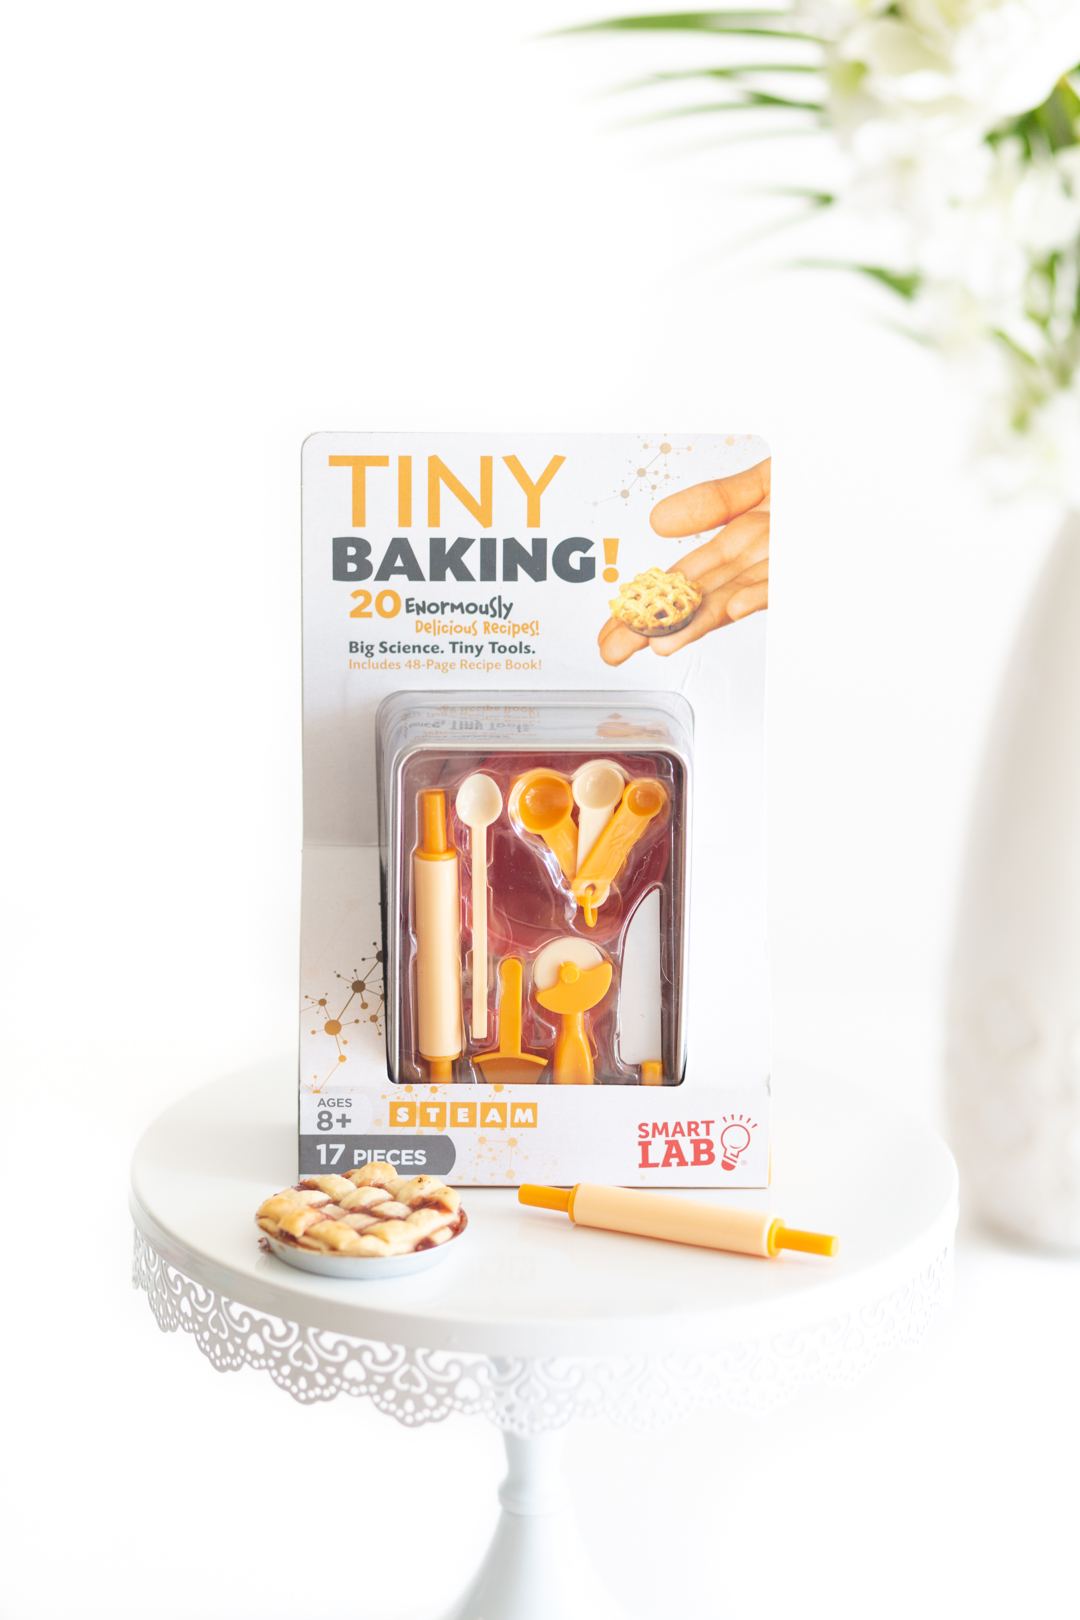 Tiny Baking Kit in package with mini baked pie and mini roller